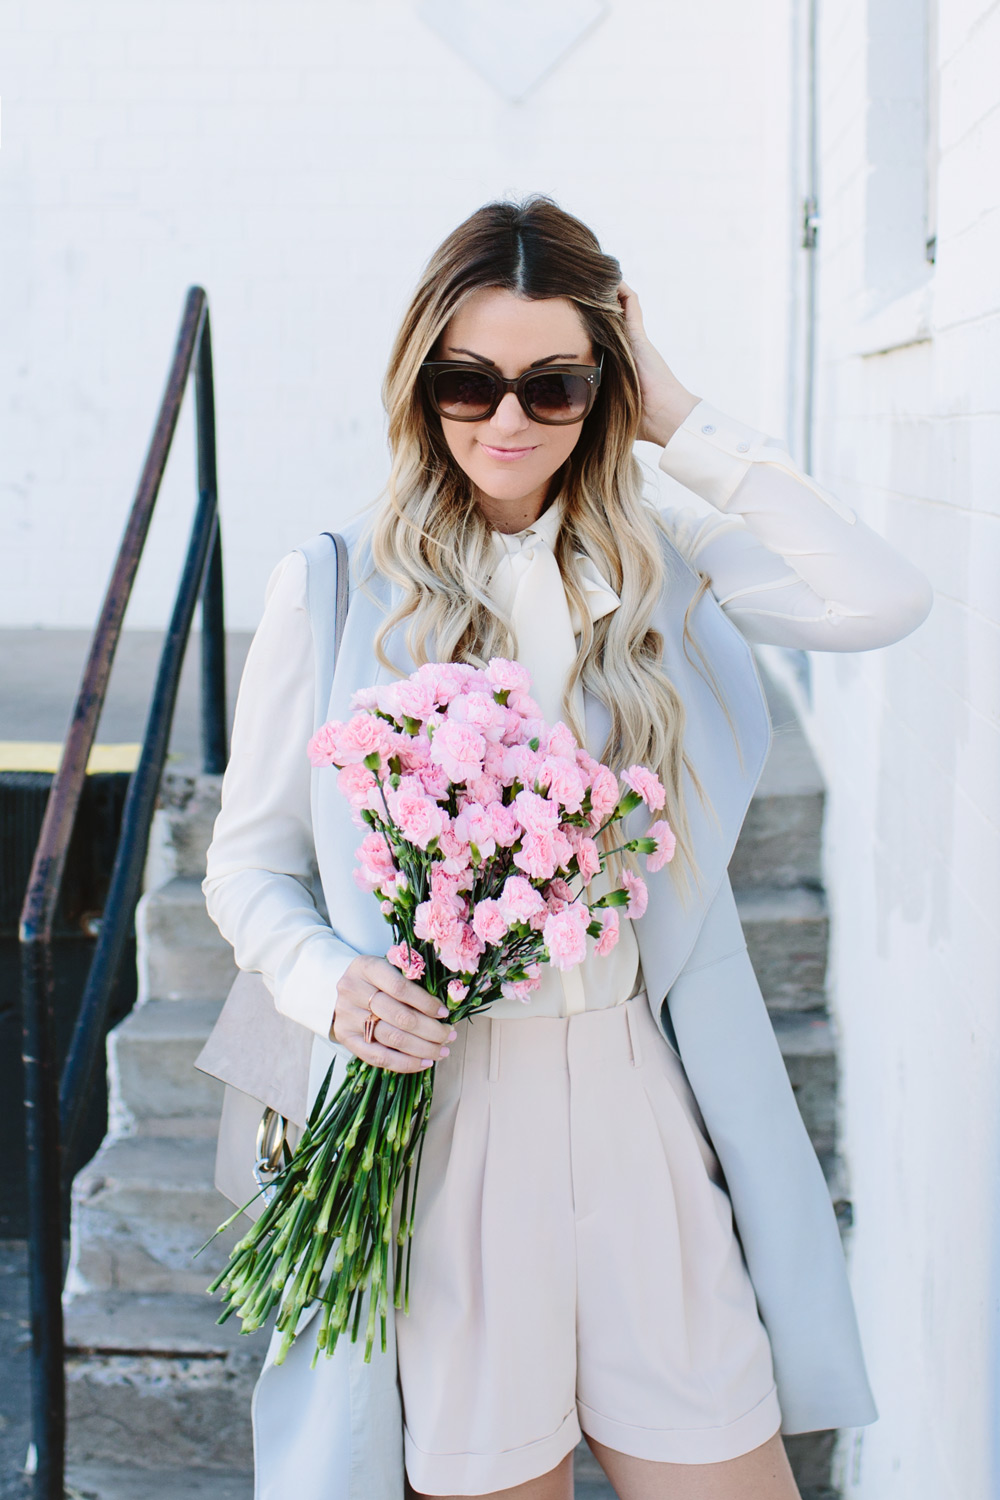 dash of darling outfit inspiration blush pink carnations valentines day ideas